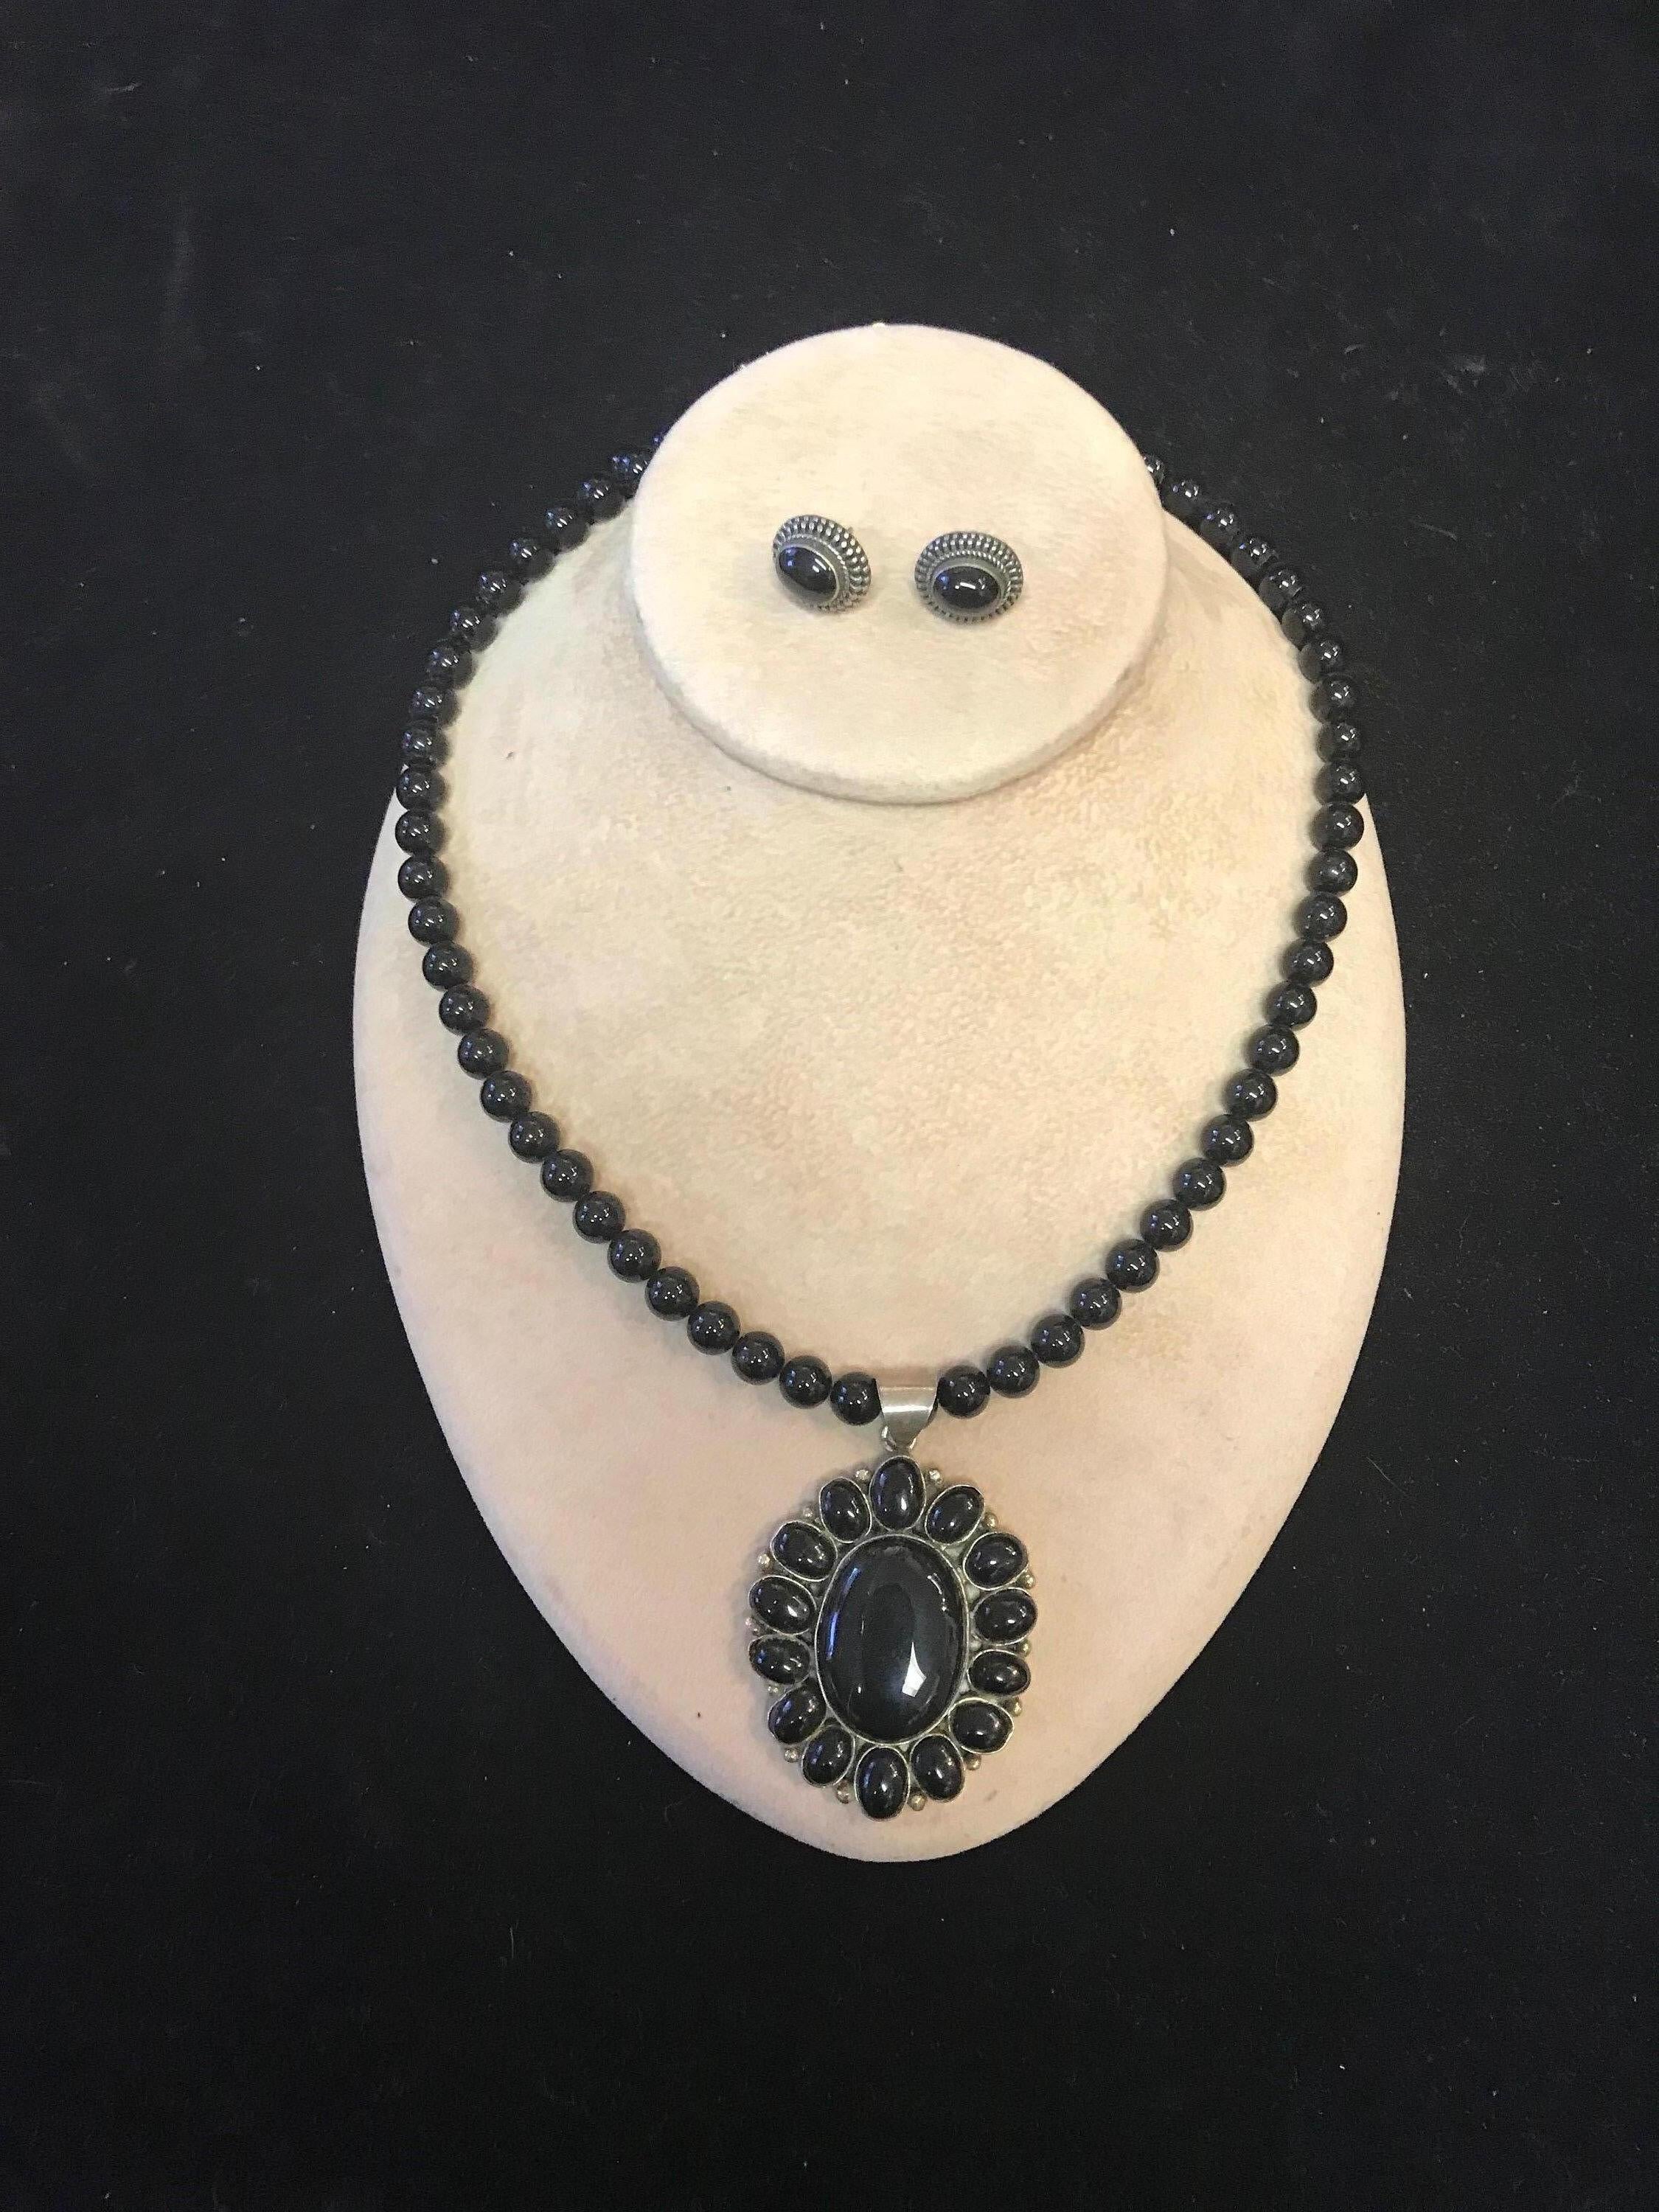 Exolette Black Onyx Sterling Pendant Necklace Earring Set In Good Condition For Sale In Pahrump, NV